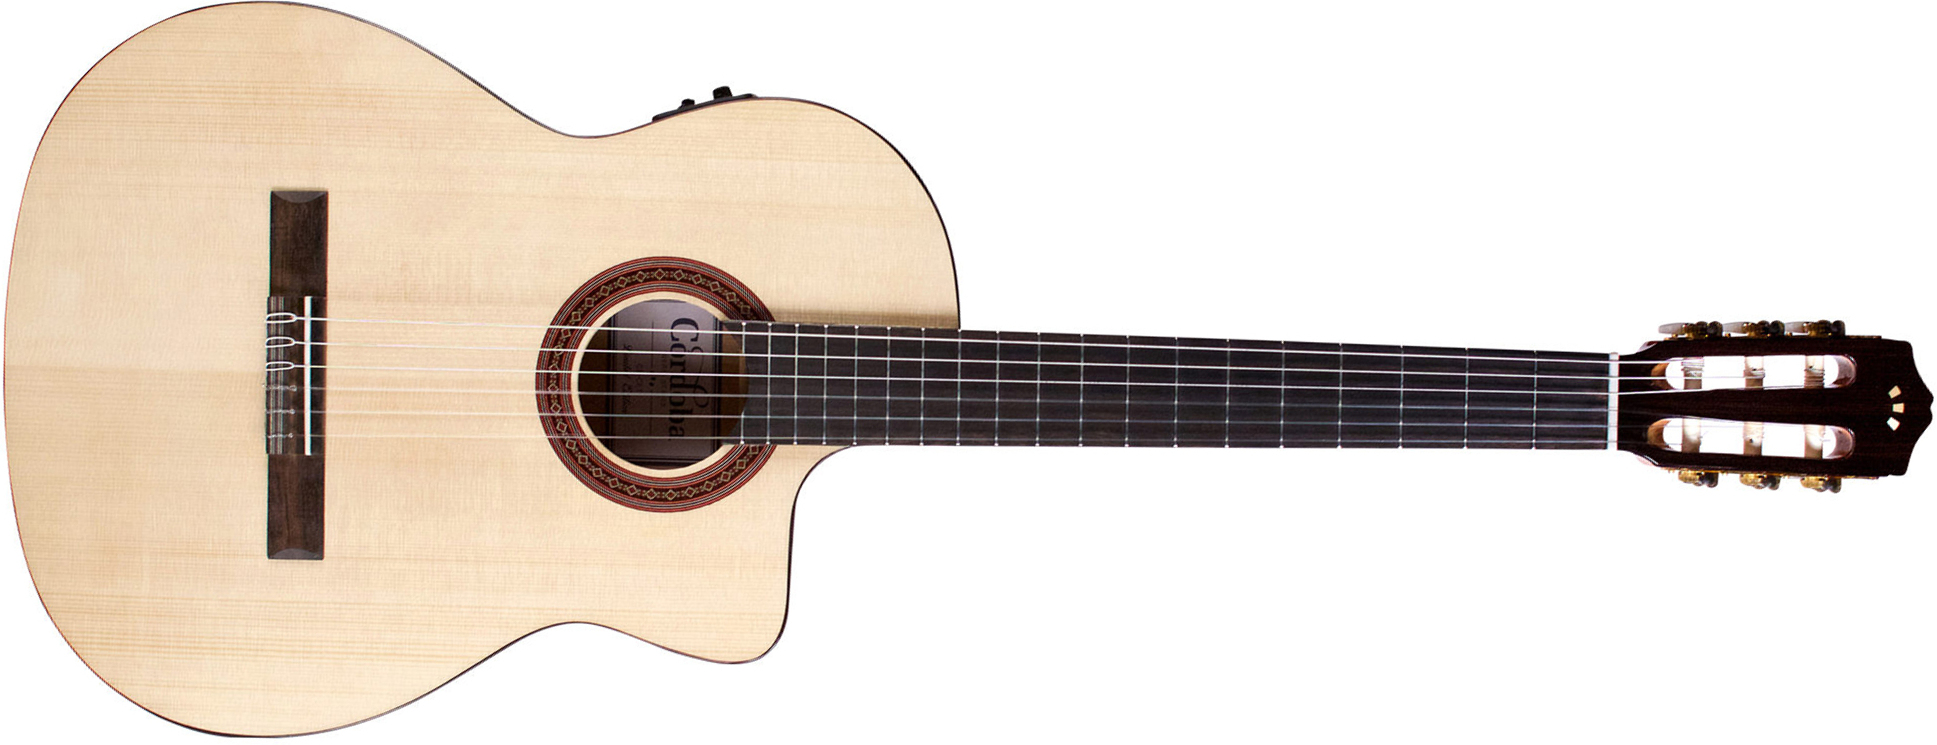 Cordoba C5 Cet Spalted Maple Limited Thinbody Cw Epicea Erable Pf - Natural - Classical guitar 4/4 size - Main picture